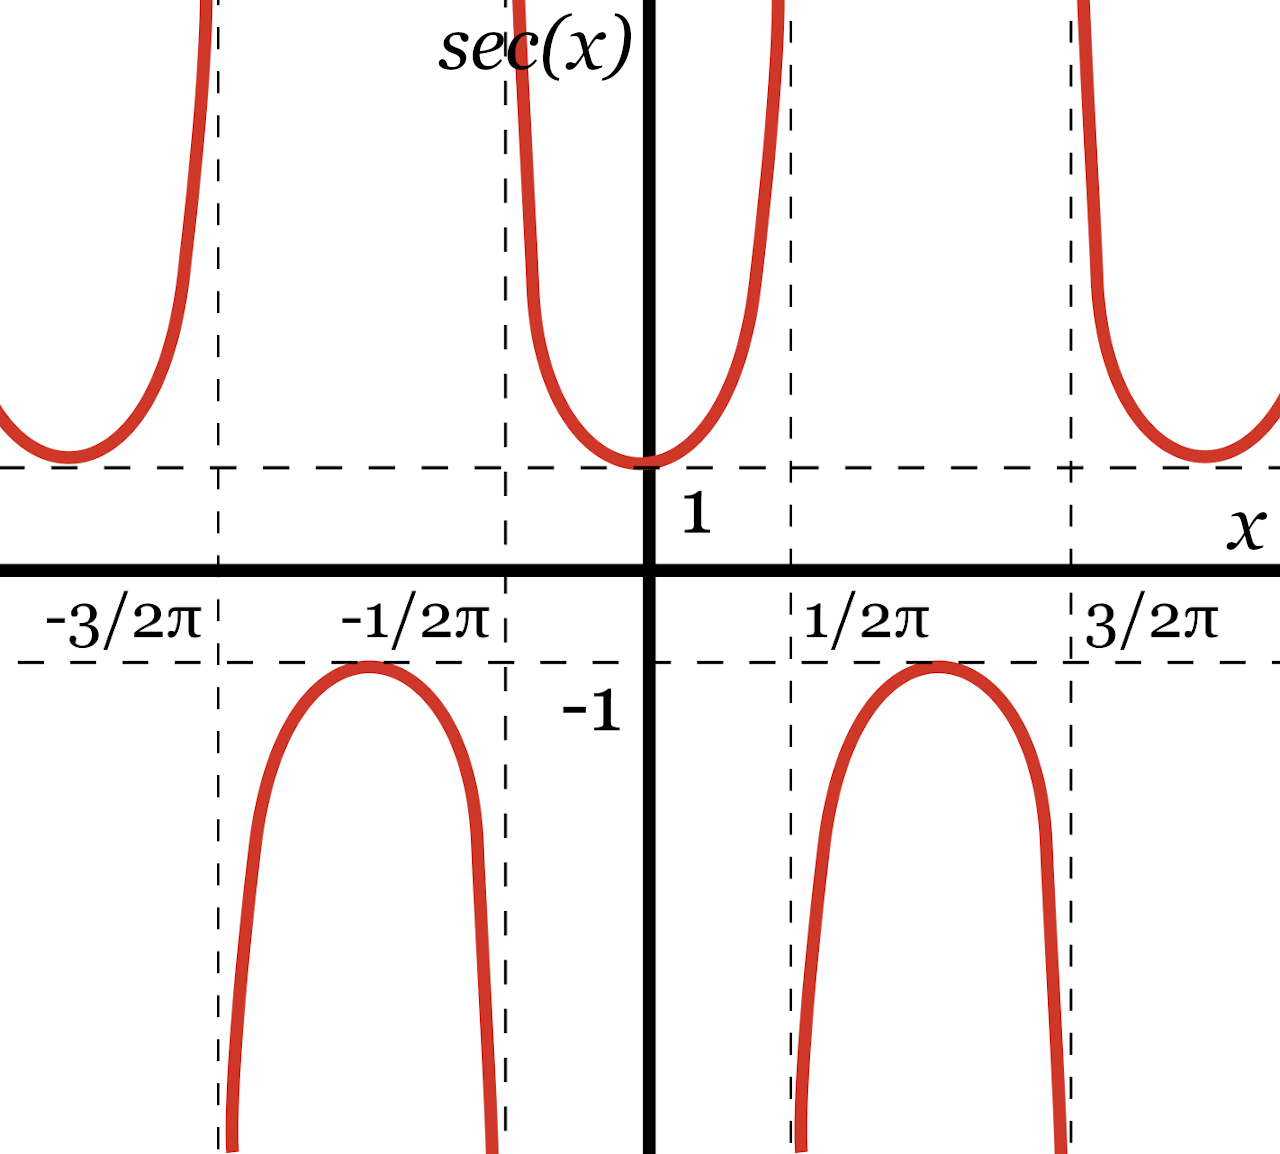 graph of the repeating curves representing possible secant values